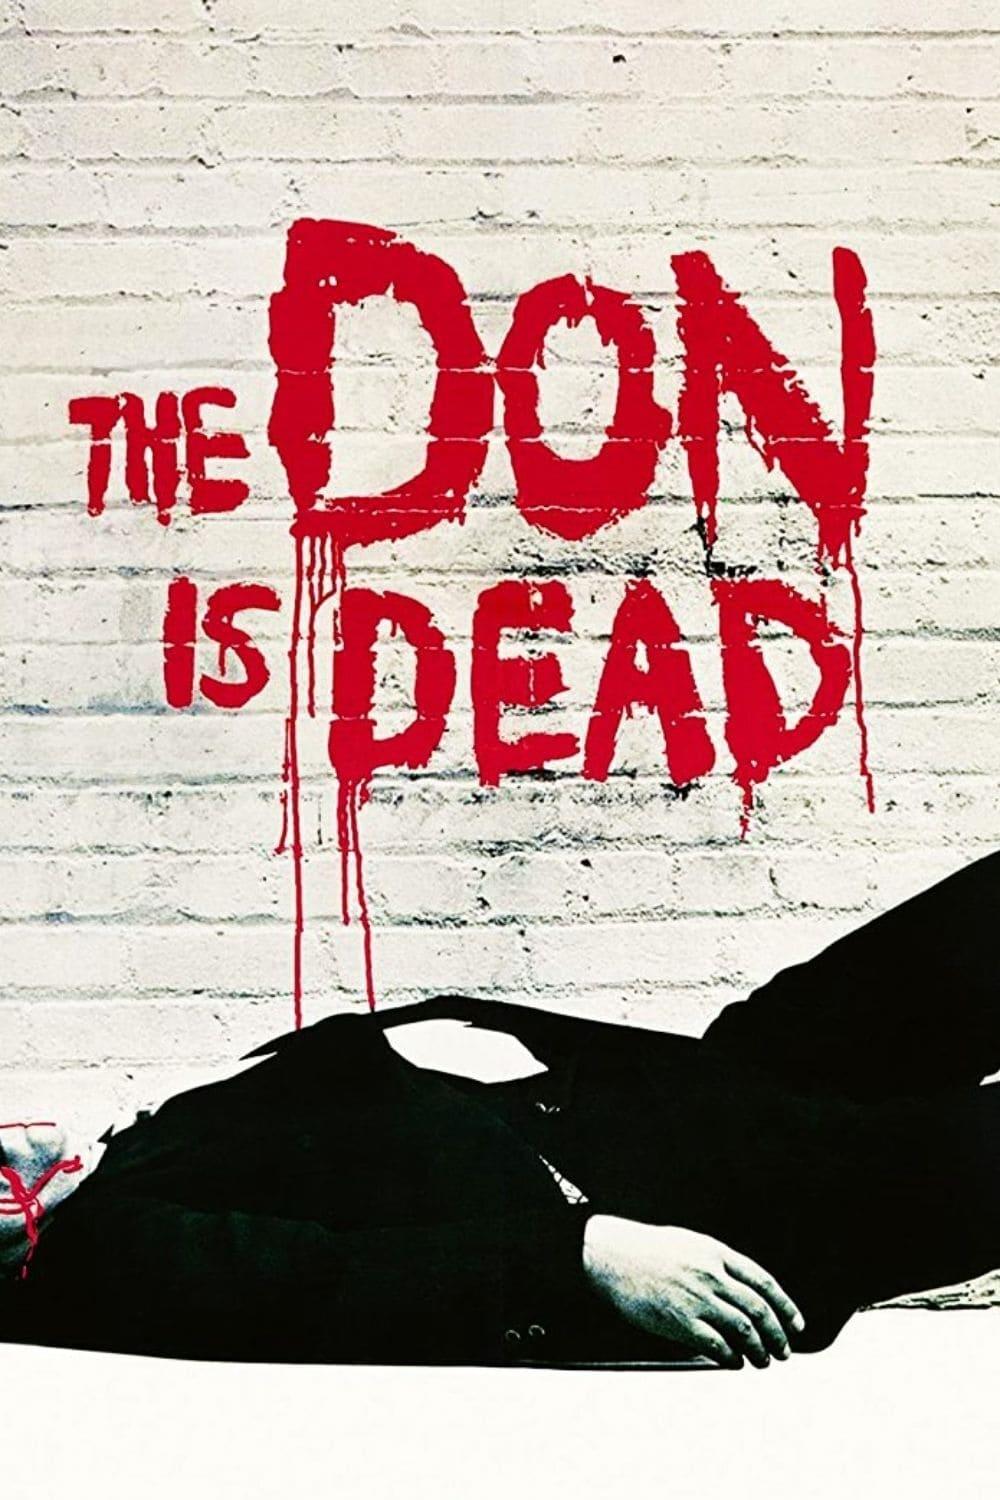 The Don Is Dead poster